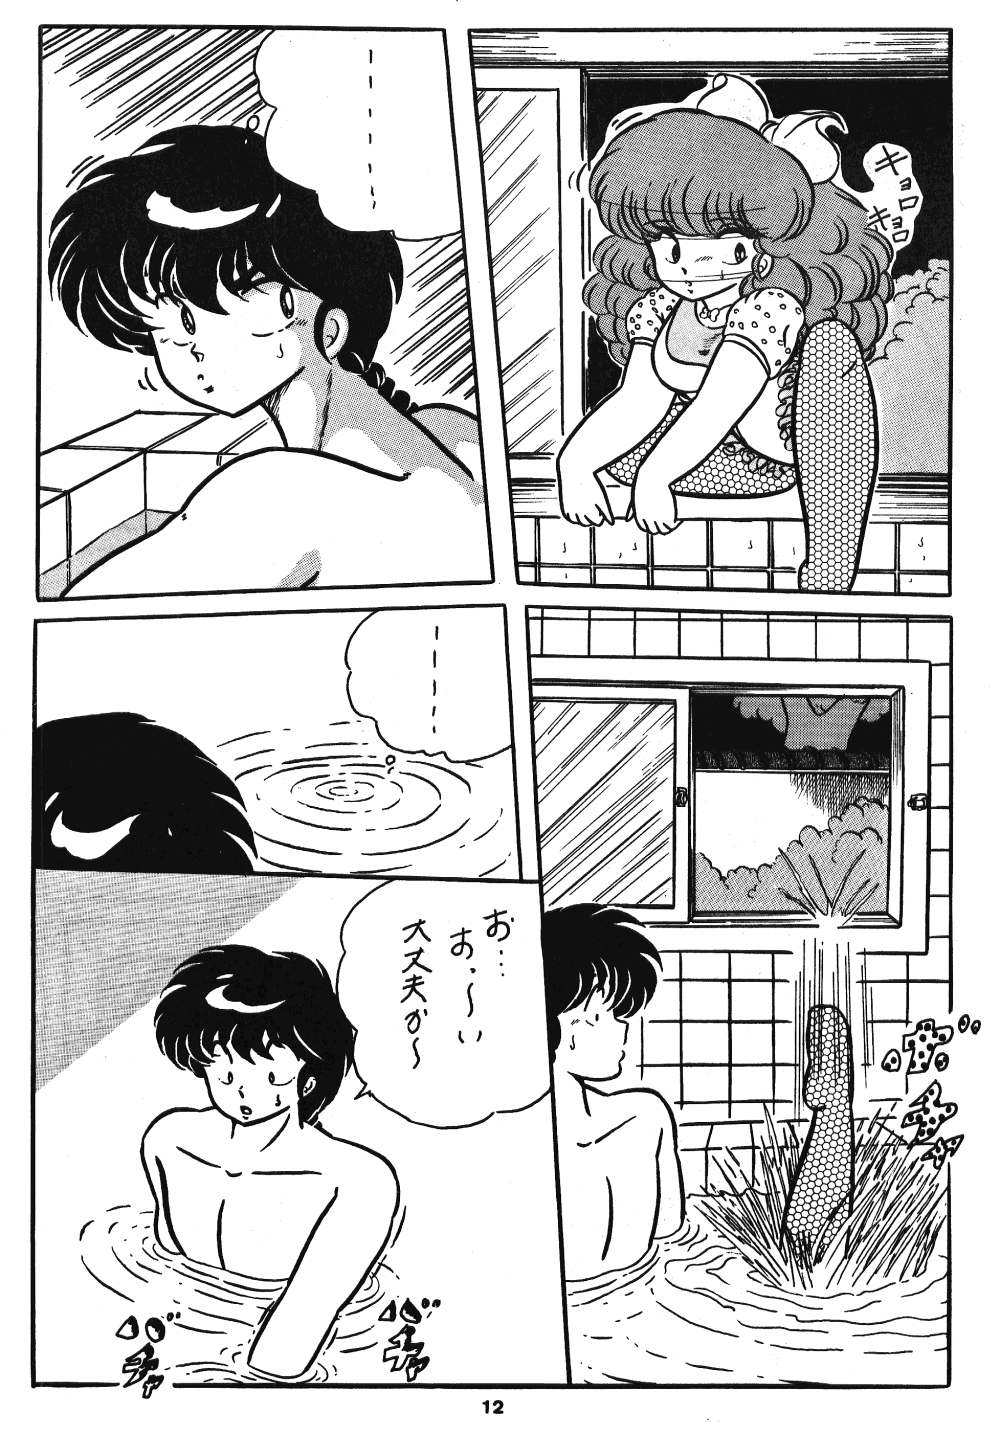 [C-COMPANY] C-COMPANY SPECIAL STAGE 2 (Ranma 1/2) page 13 full